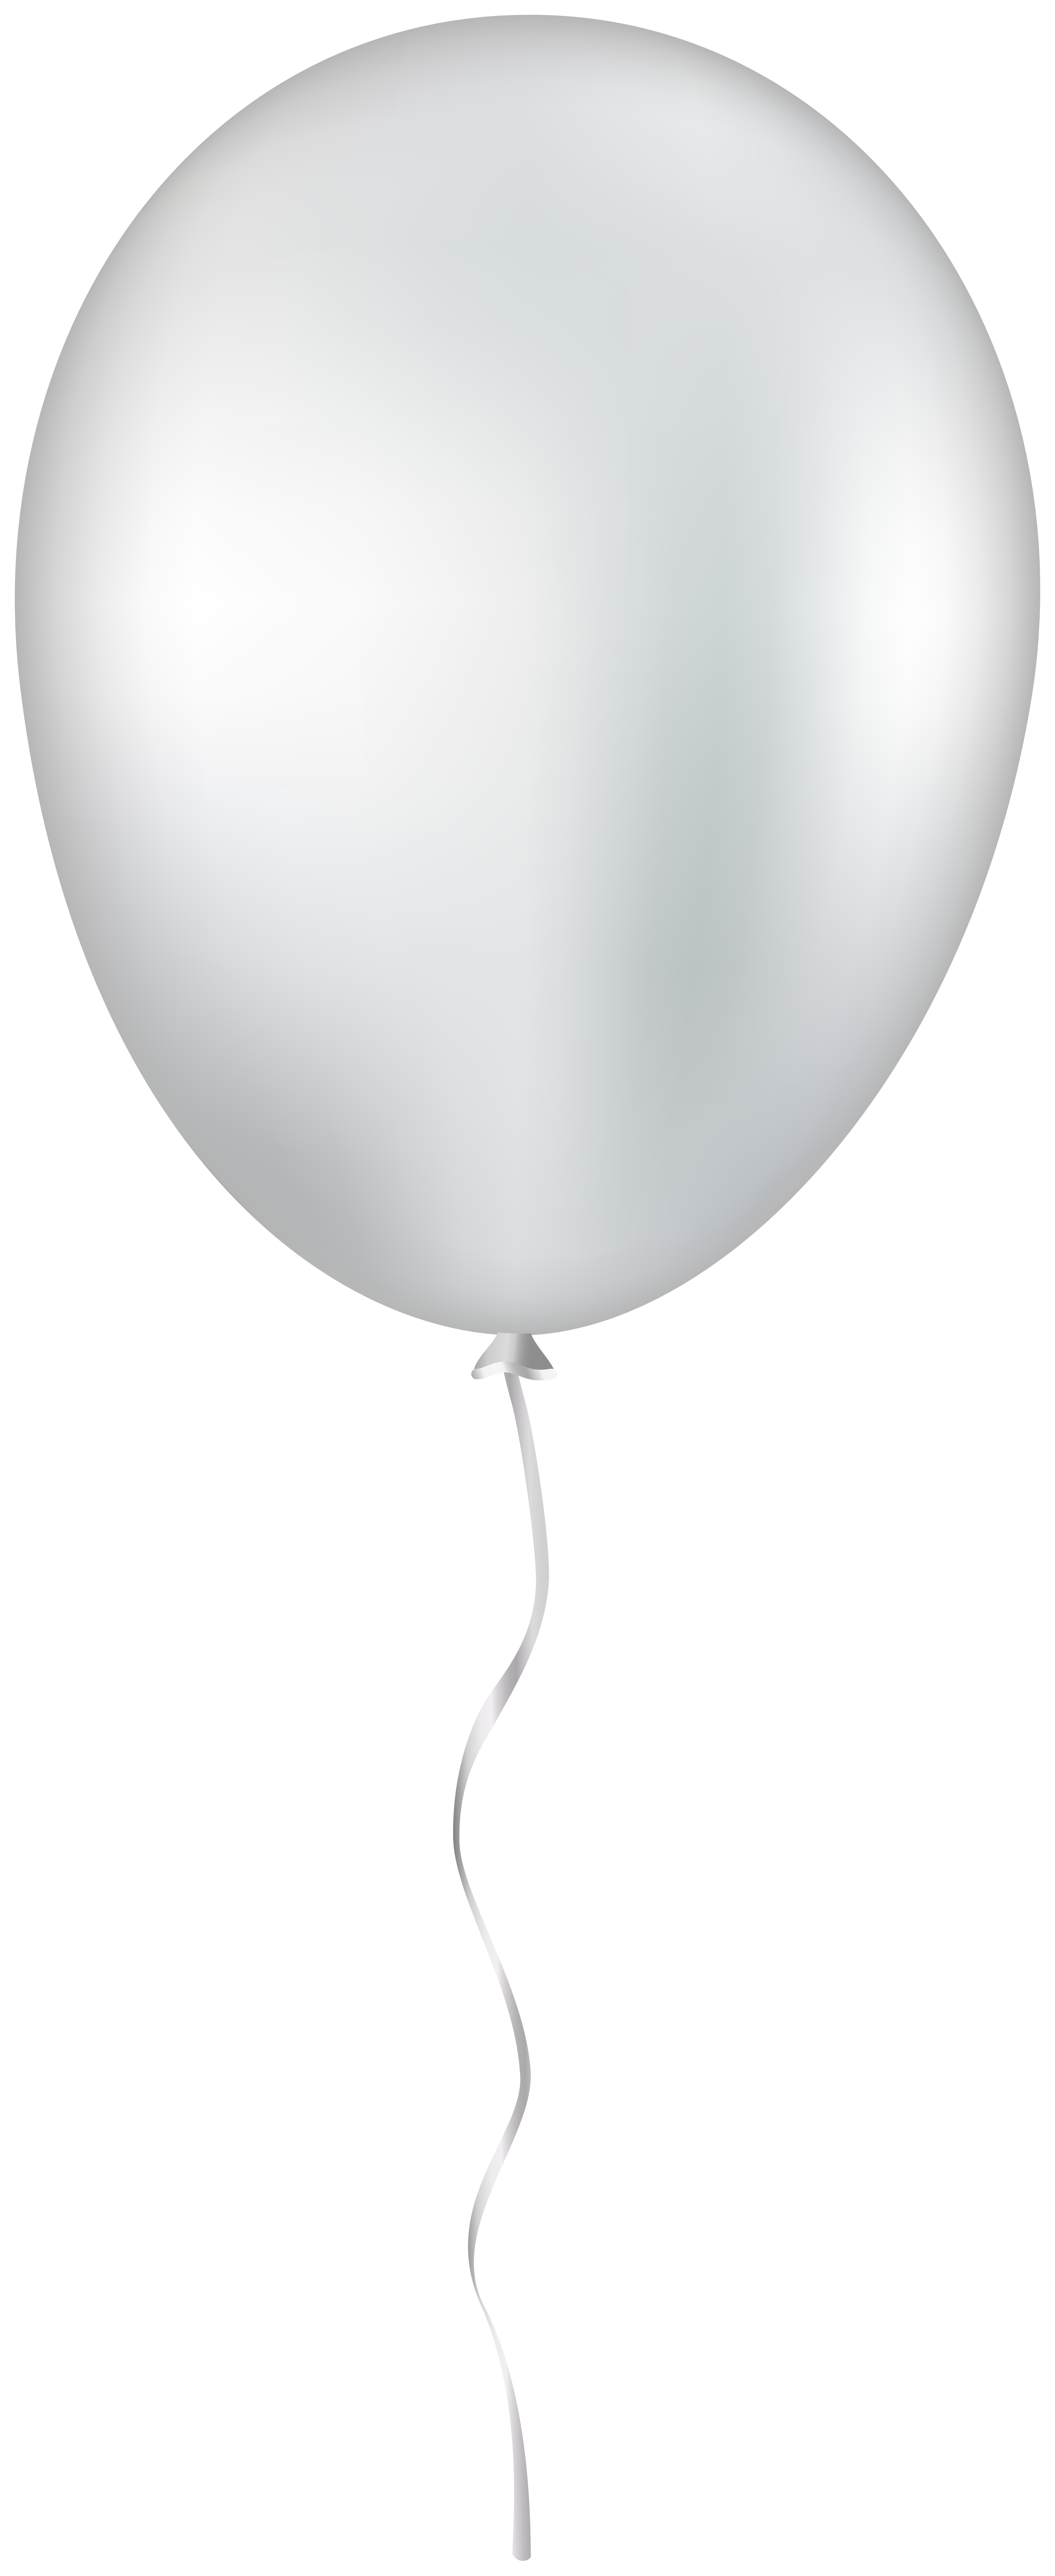 White Single Balloon PNG Clipart | Gallery Yopriceville - High-Quality ...